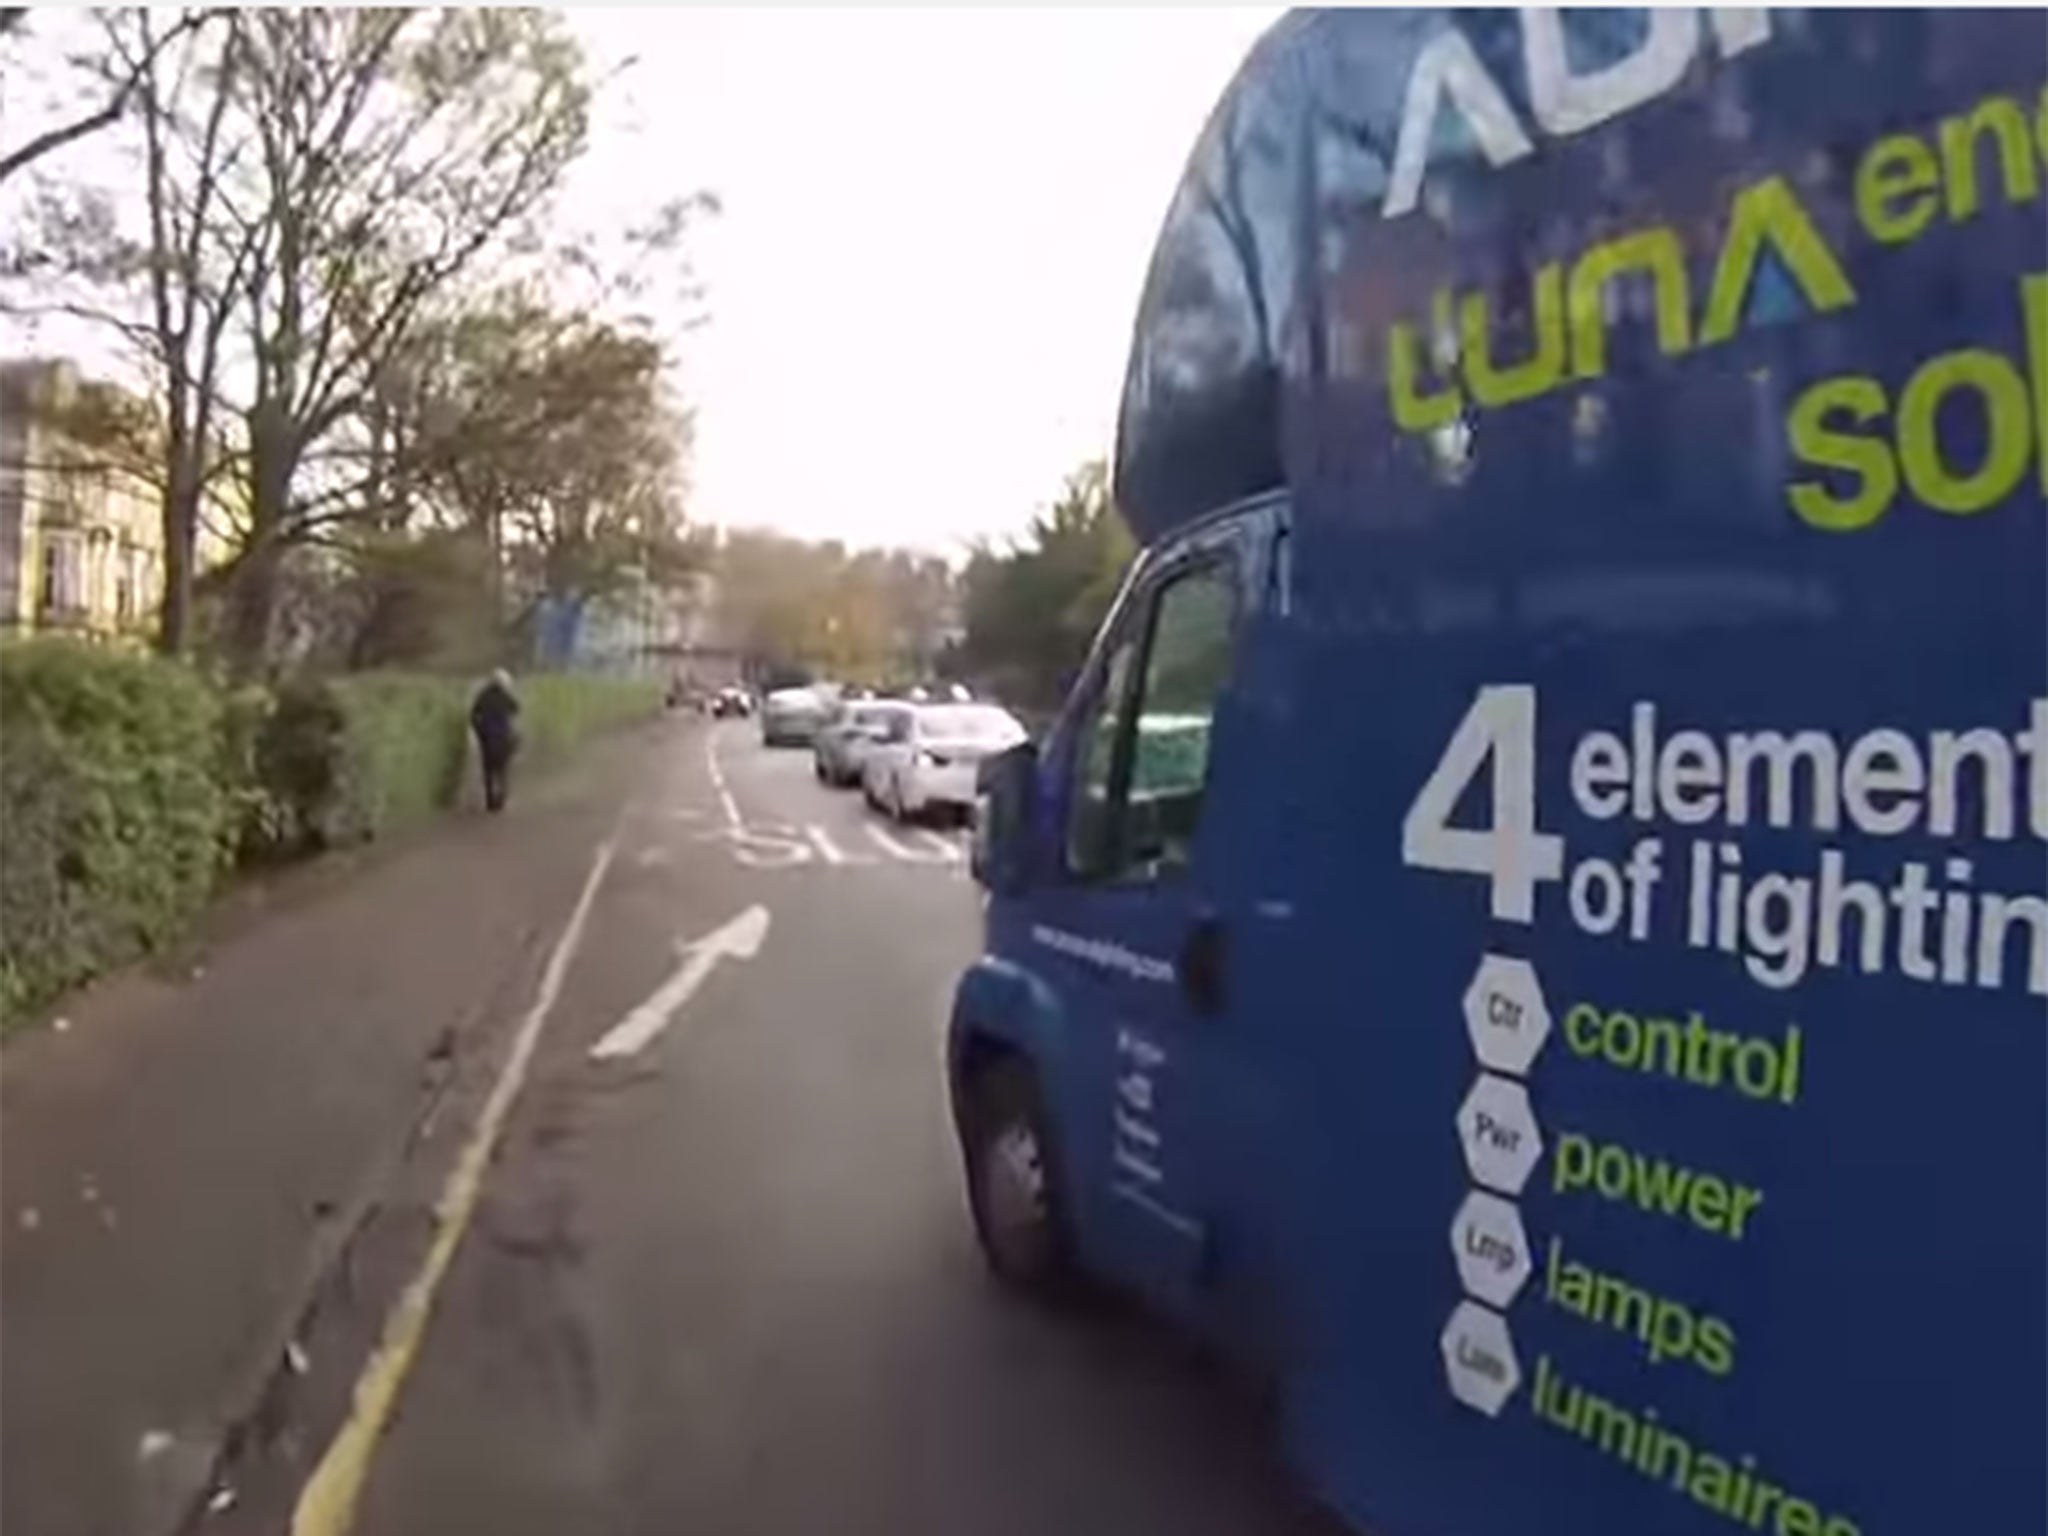 The video shows the driver of an Aurora Lighting van using a cycling lane to avoid traffic.